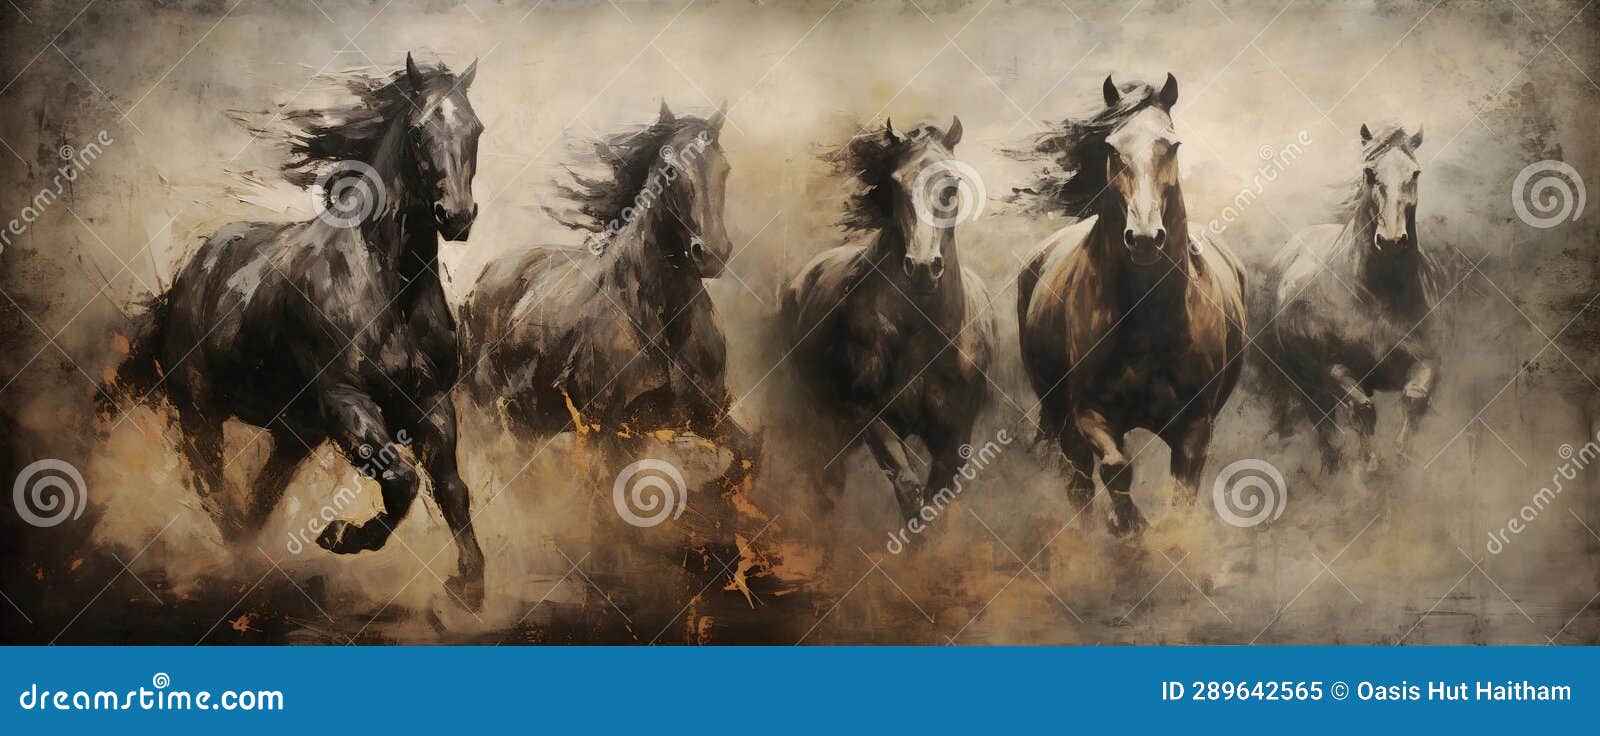 abstract textured drawing horses in wildlife shaded oil painting for interior murals wall art dÃ©cor.